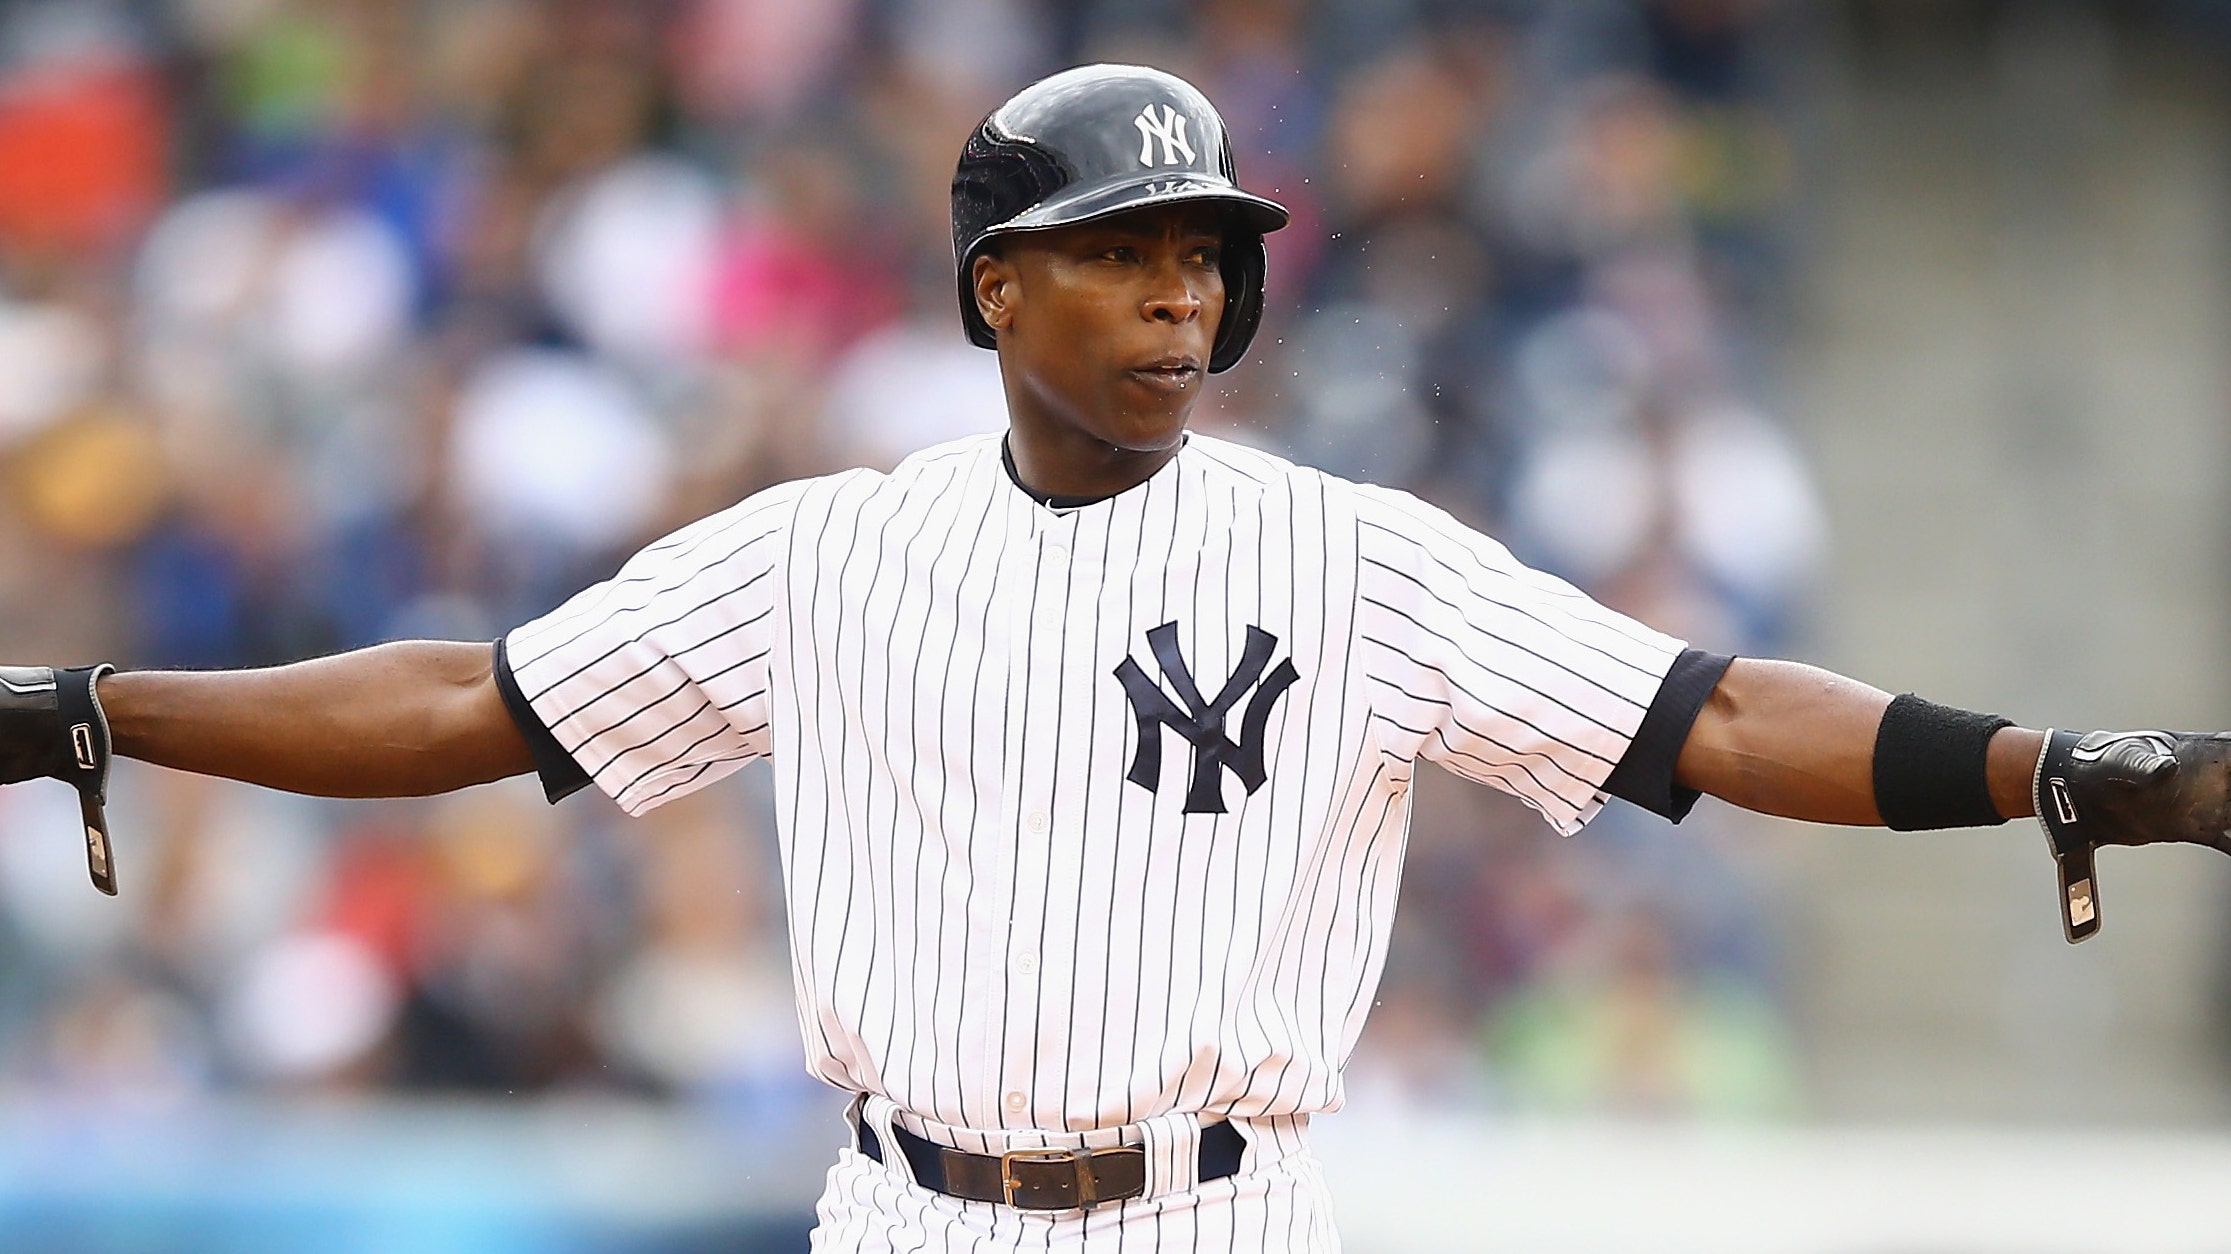 Alfonso Soriano announces his retirement from baseball after a 16